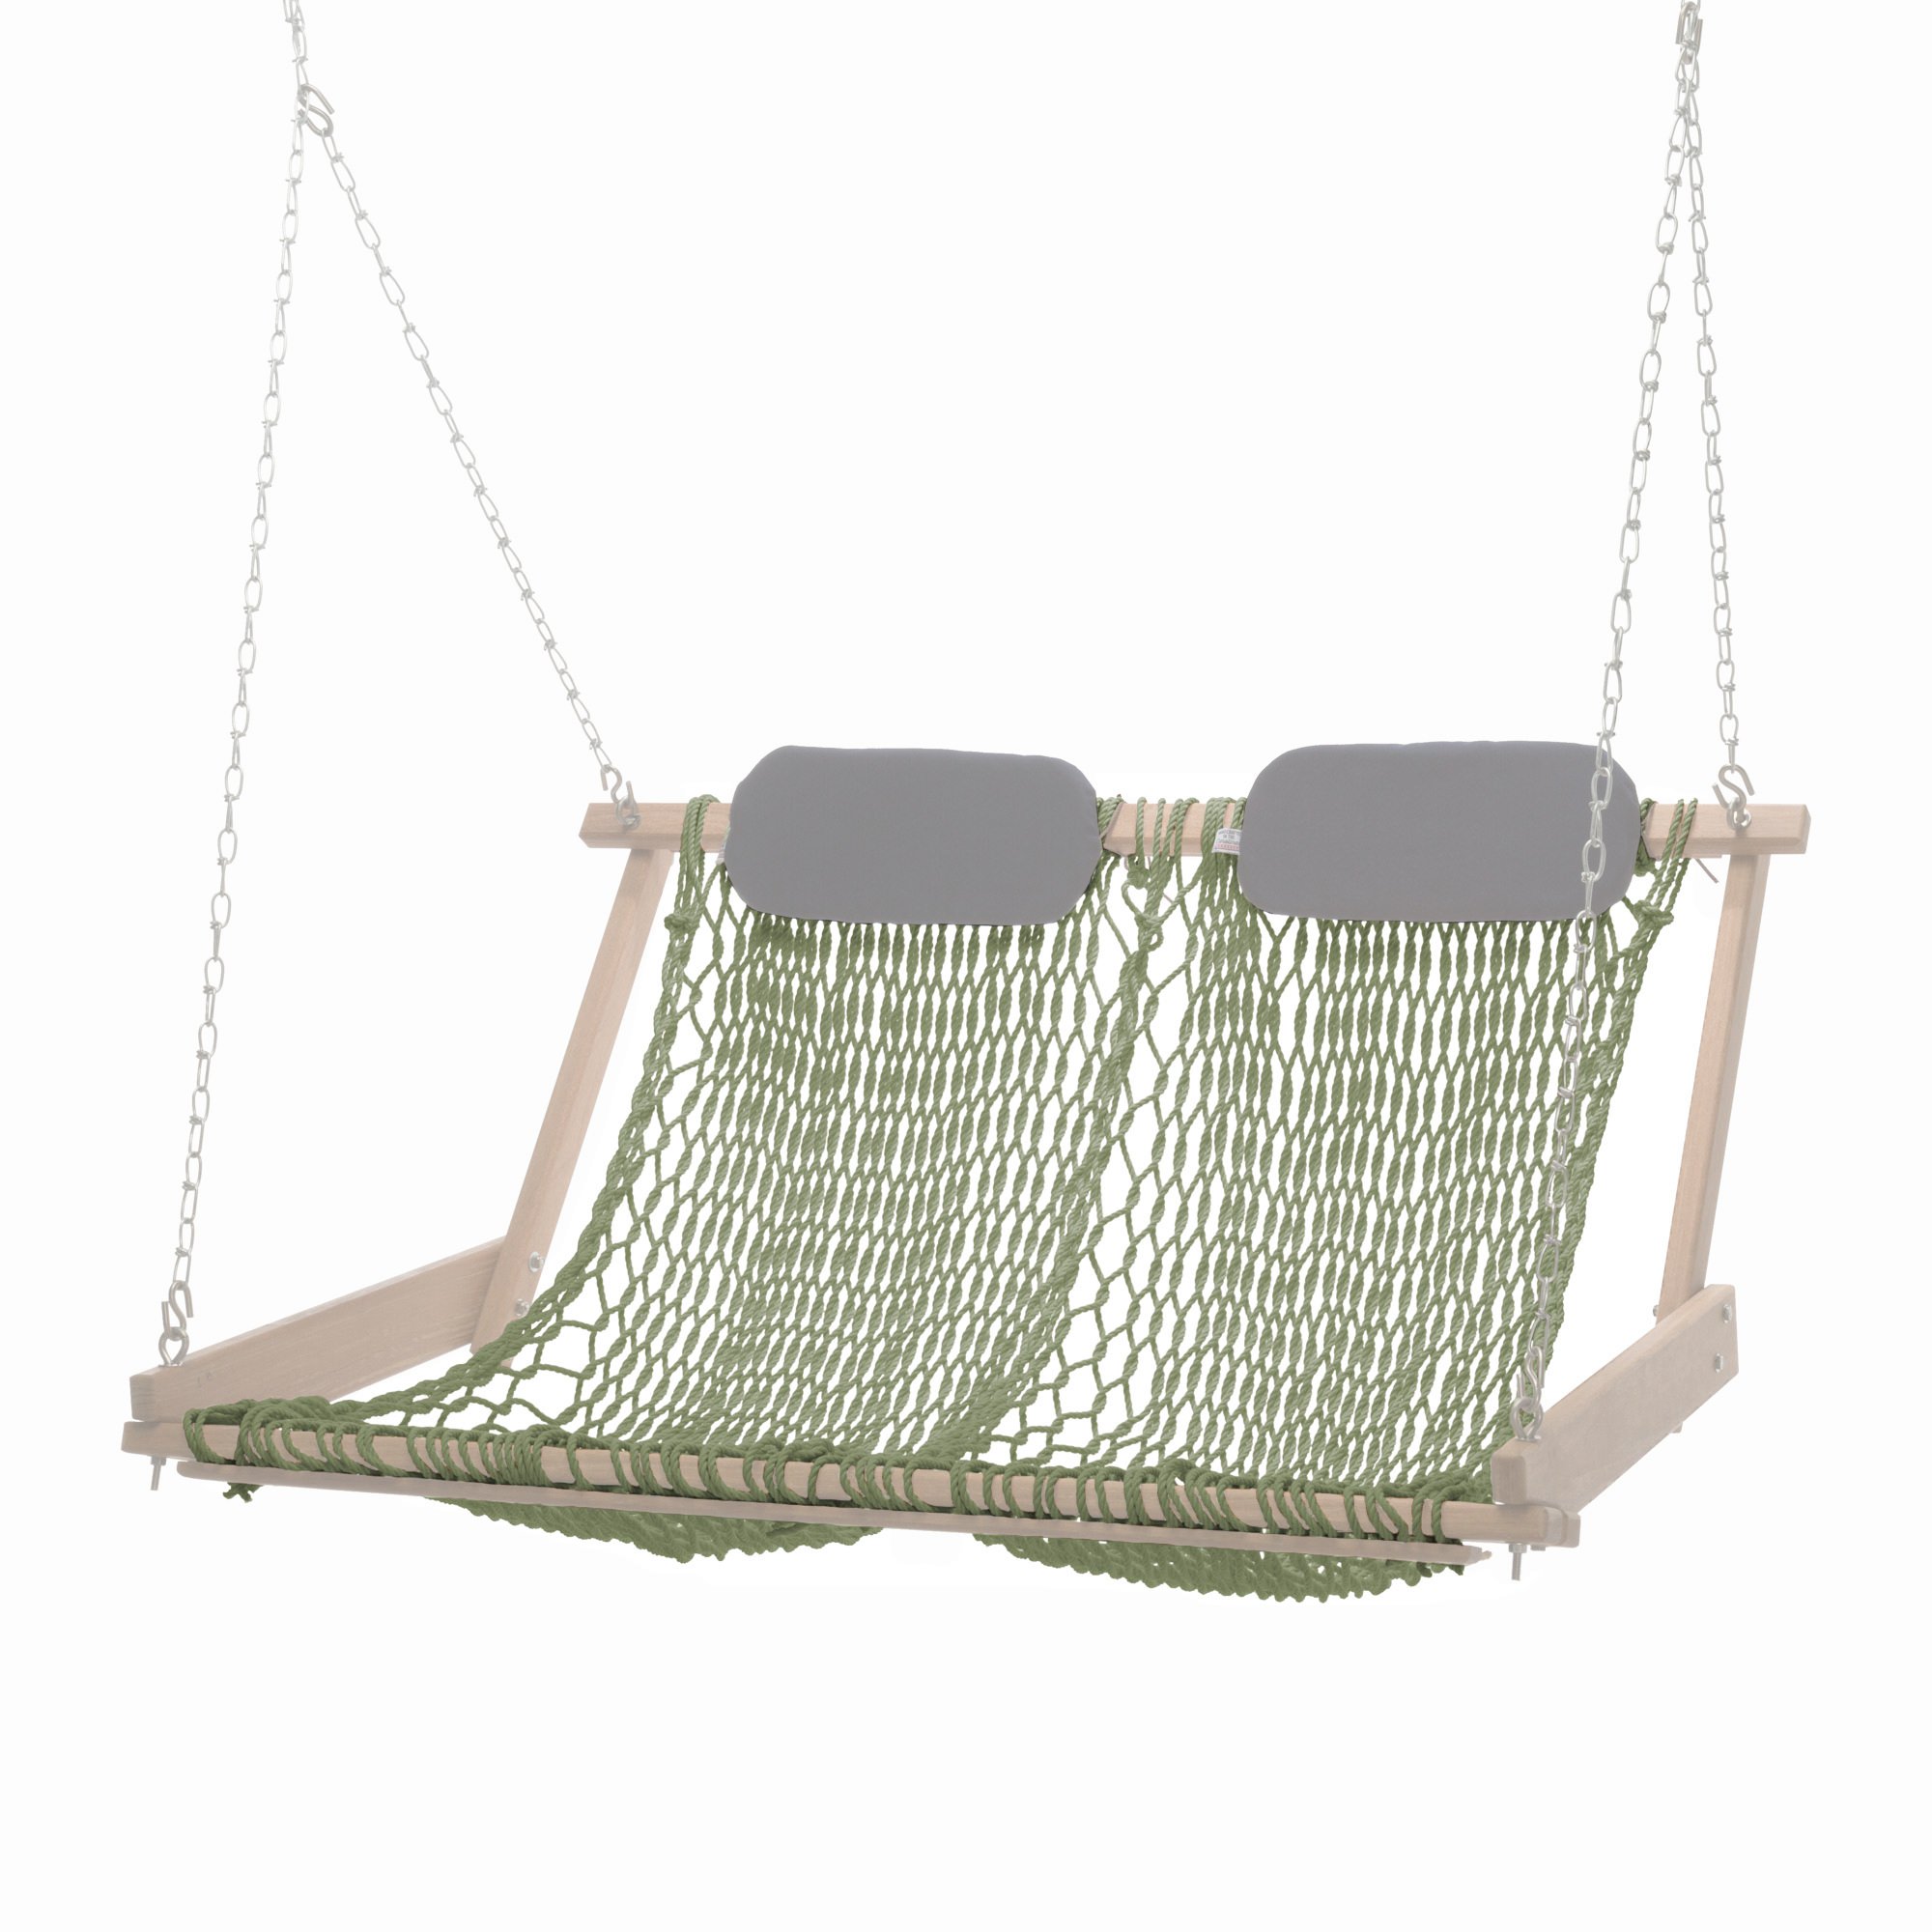 Double Chair/Swing Seat